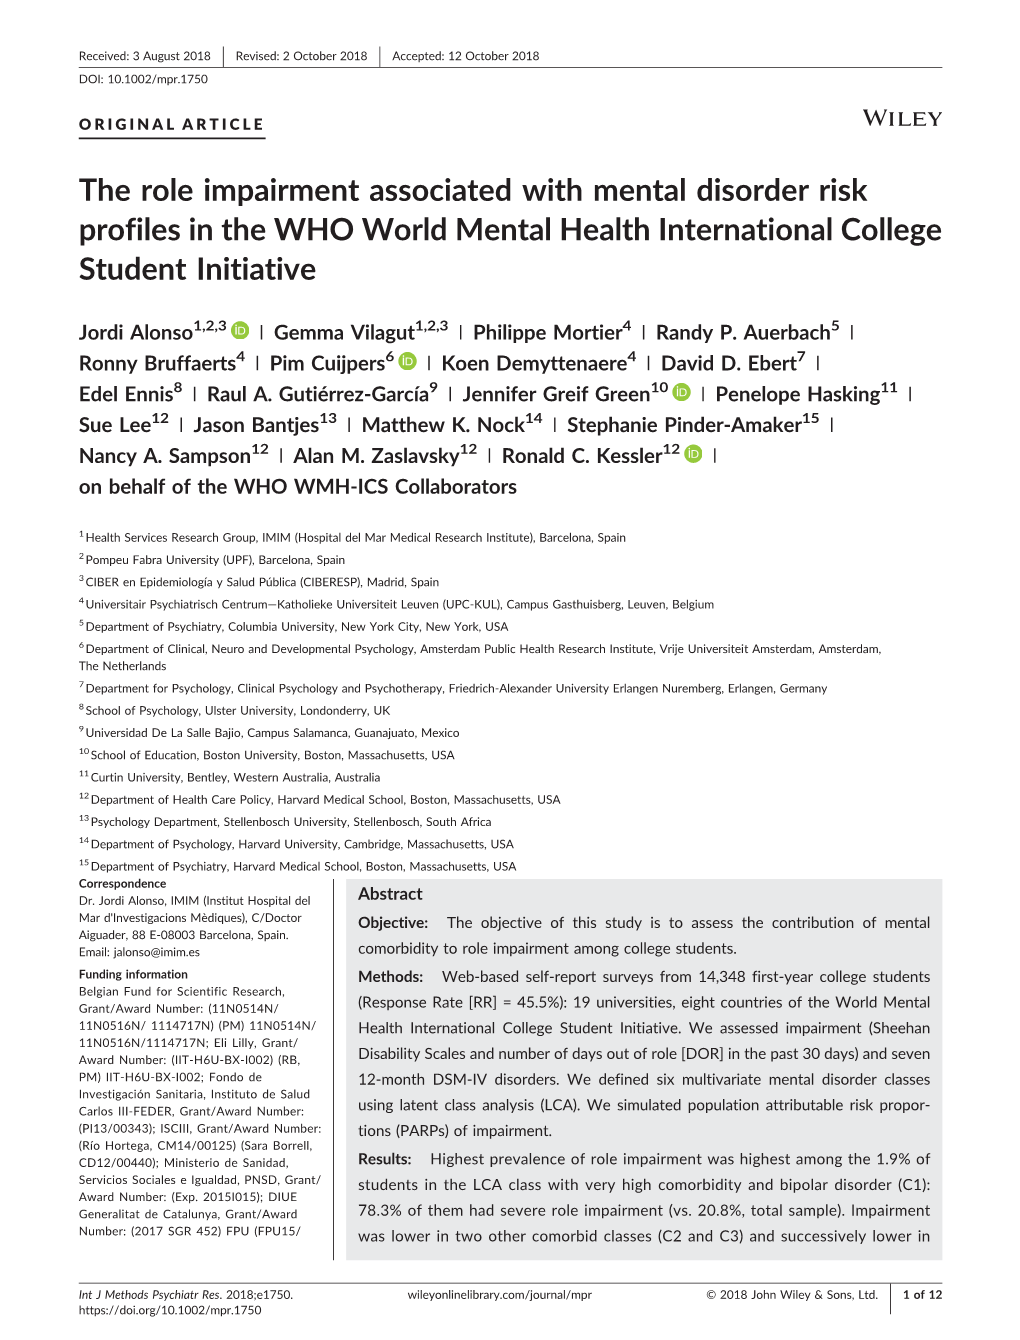 The Role Impairment Associated with Mental Disorder Risk Profiles in the WHO World Mental Health International College Student Initiative